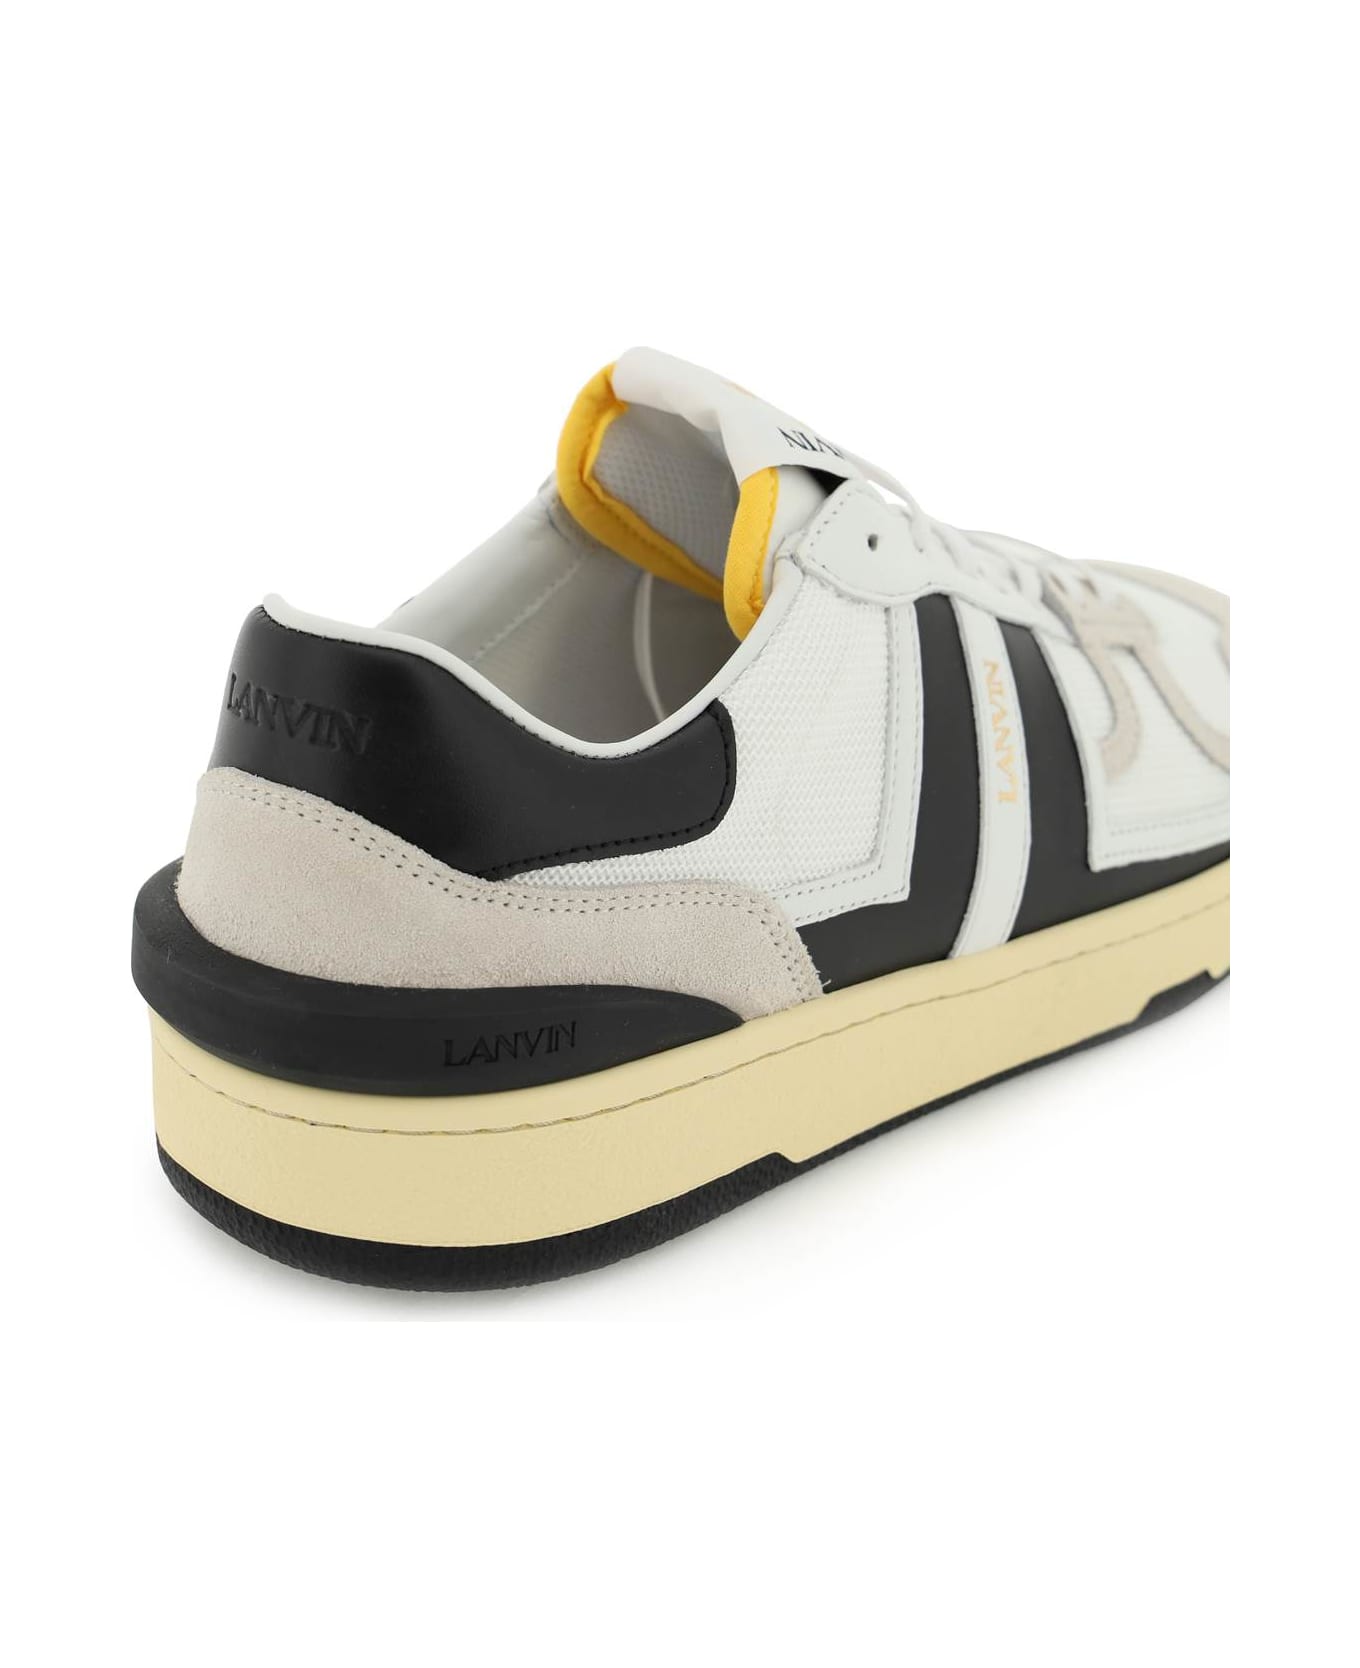 Lanvin 'clay' Sneakers - WHITE